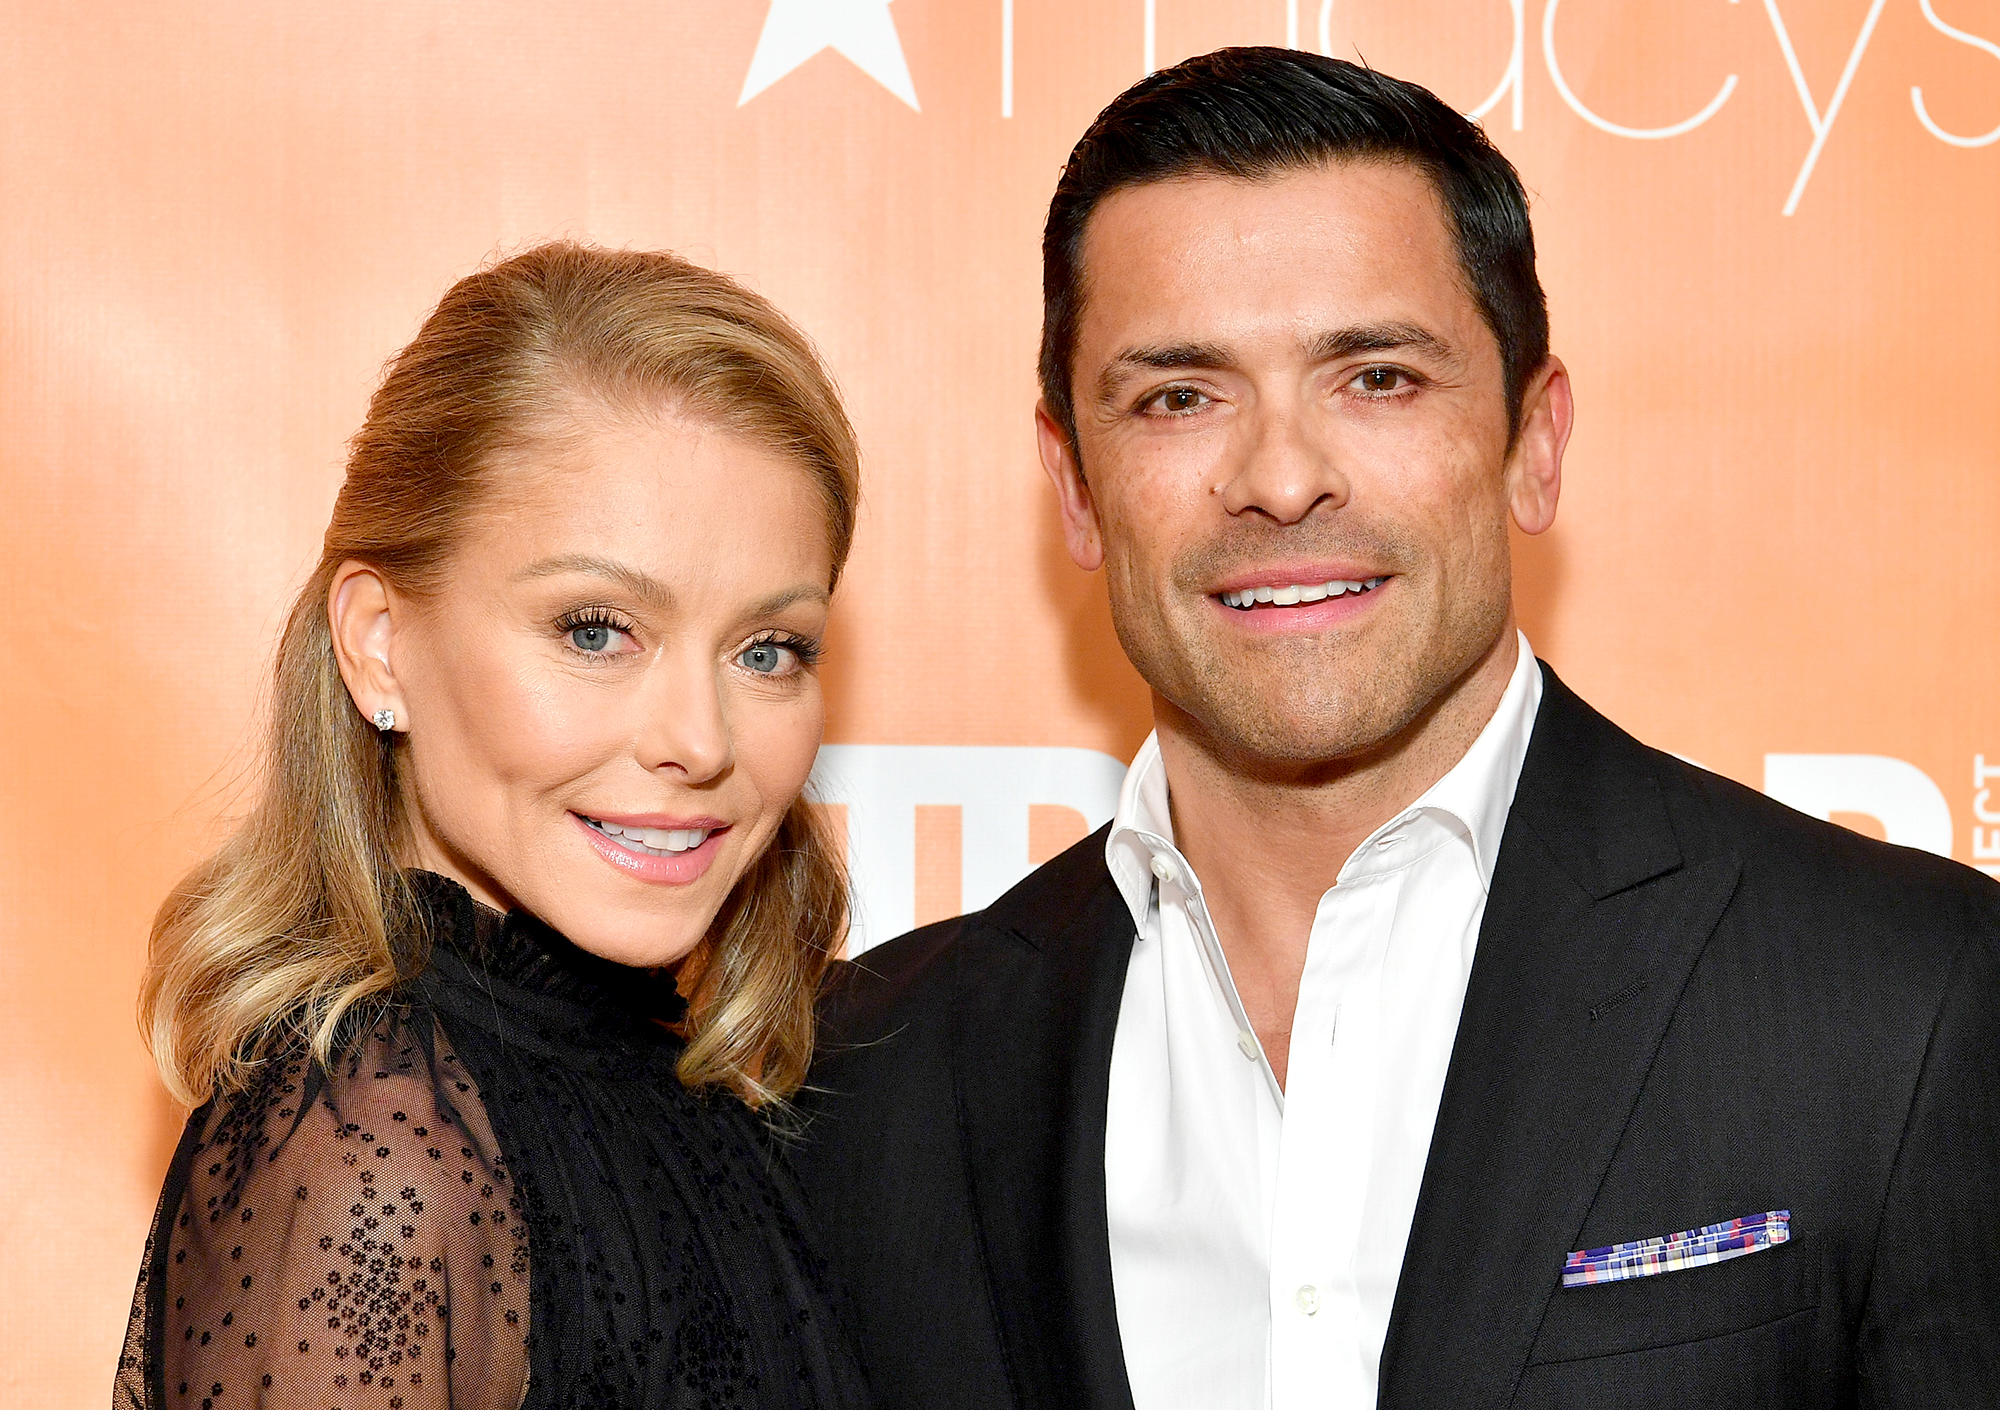 Kelly Ripa and Mark Consuelos: A Timeline of Their Relationship